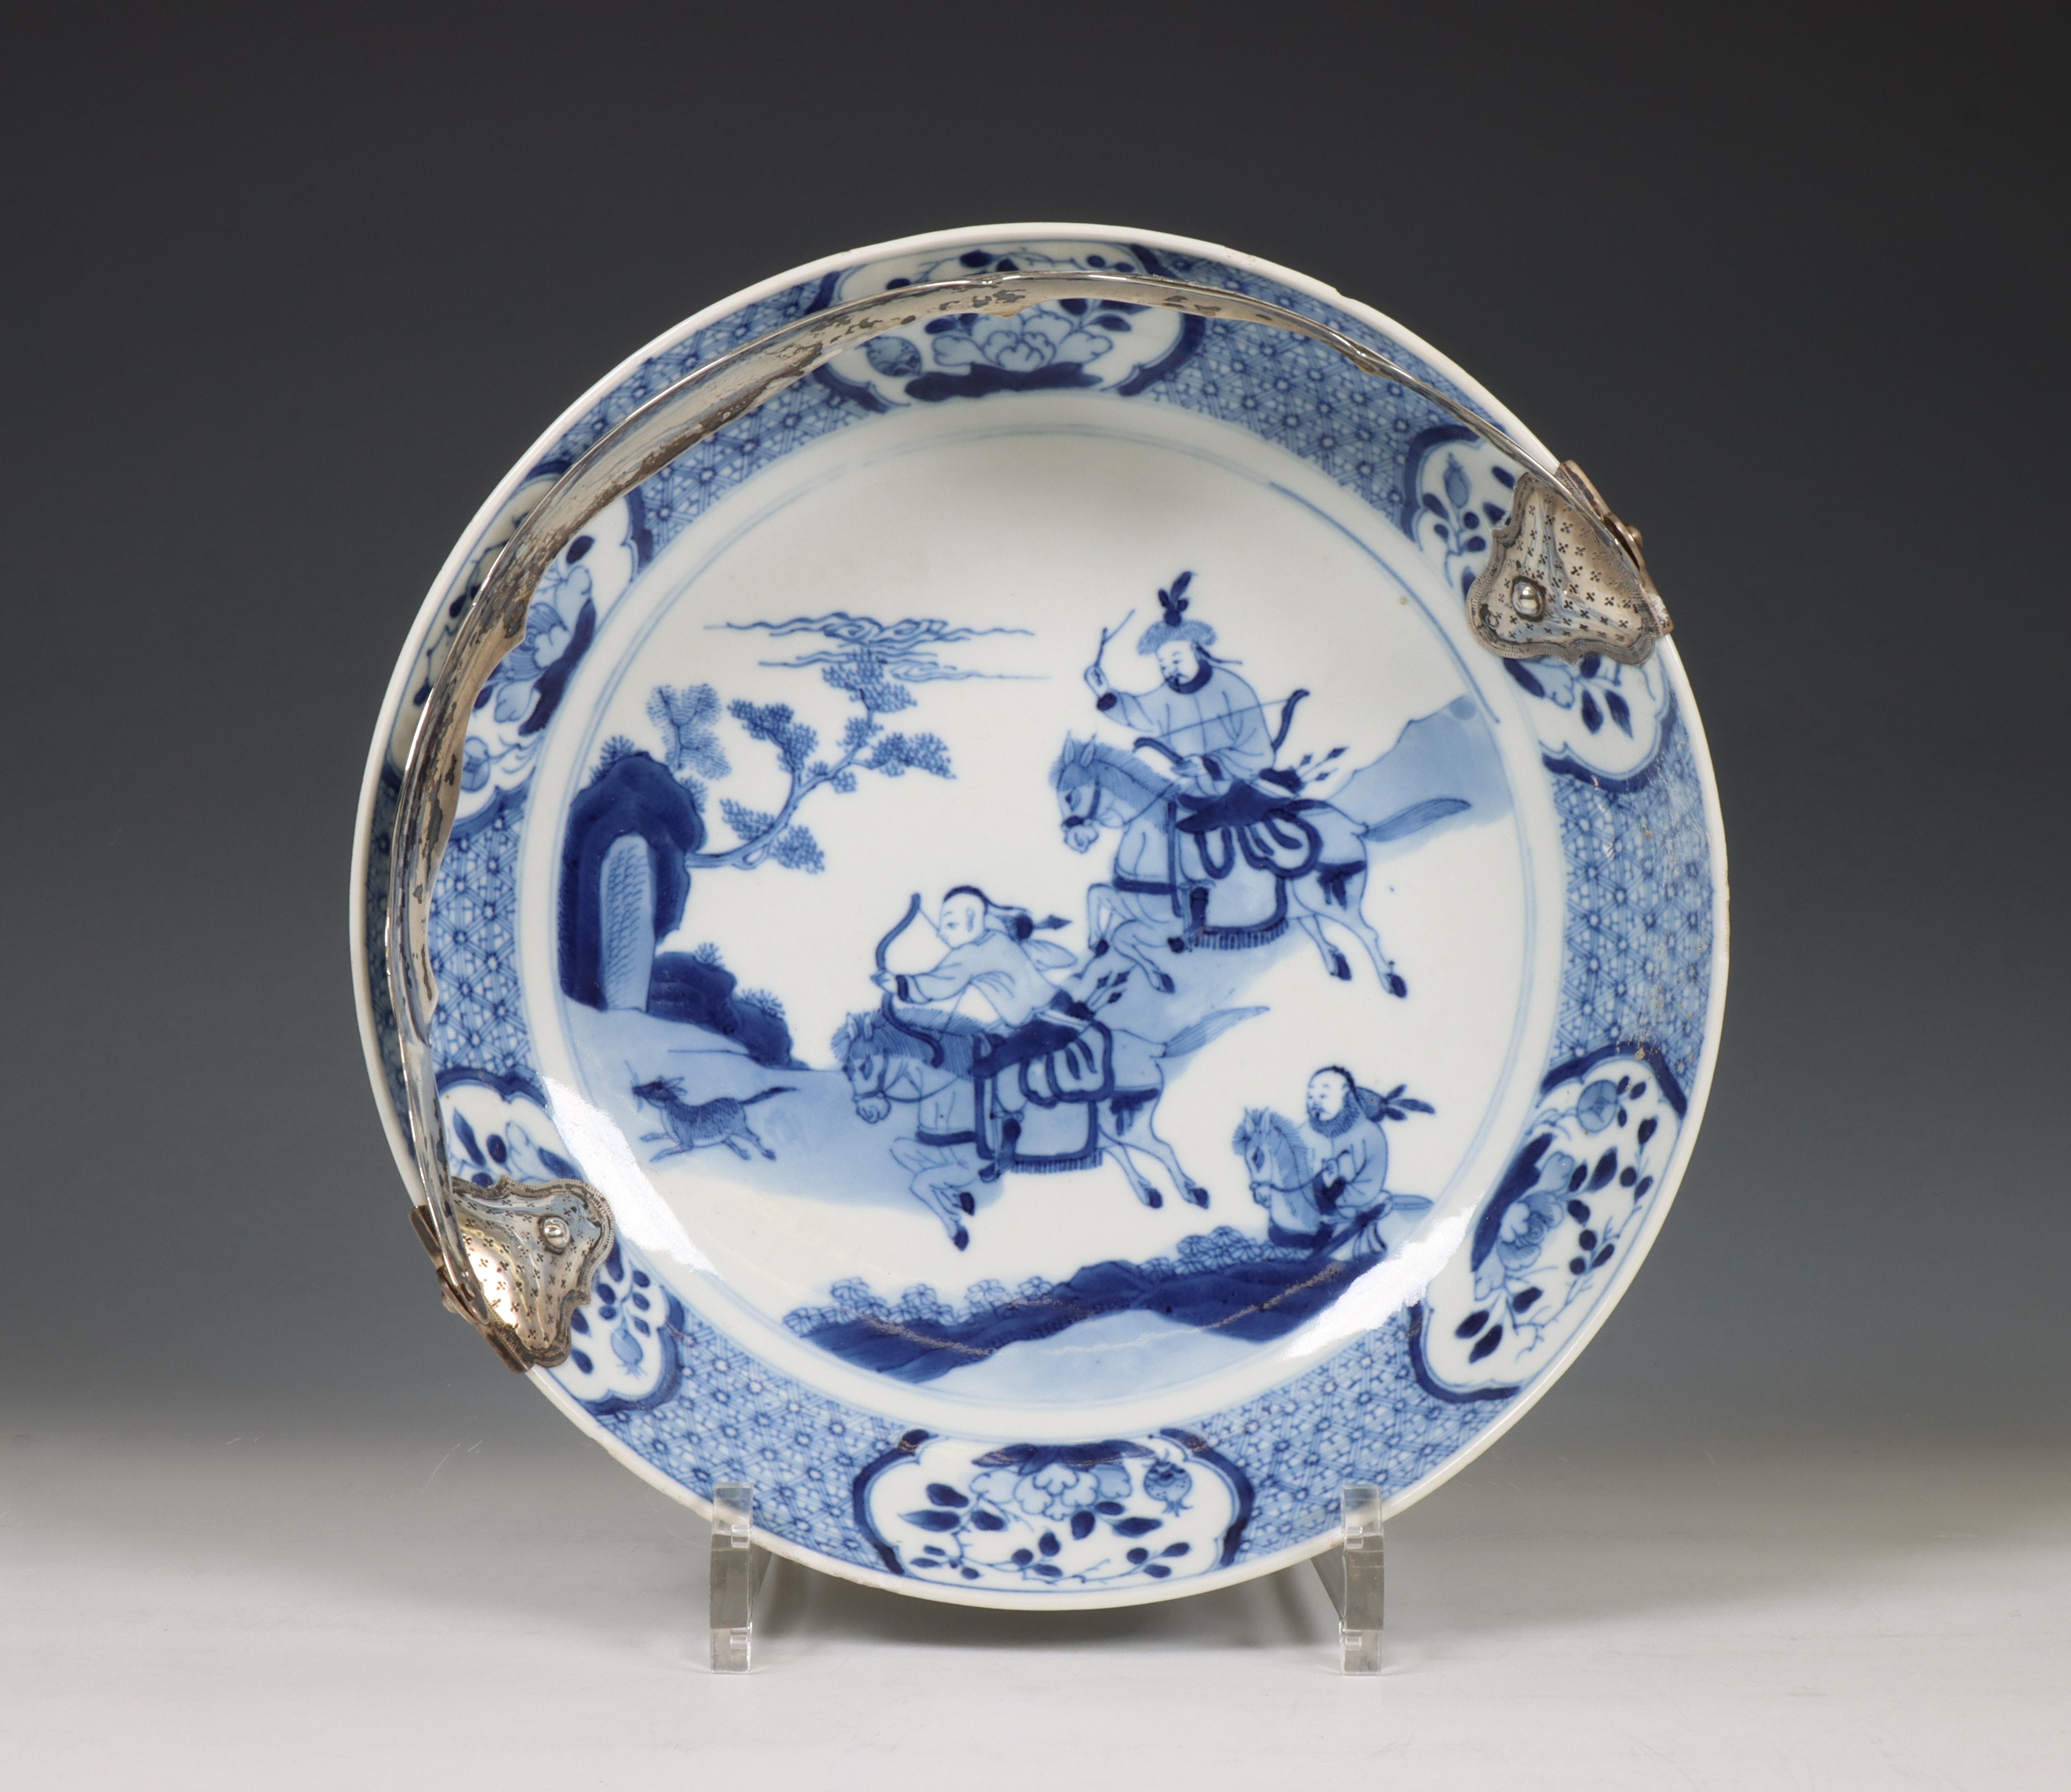 China, silver-mounted blue and white porcelain 'Joosje te paard' dish, 18th-19th century,